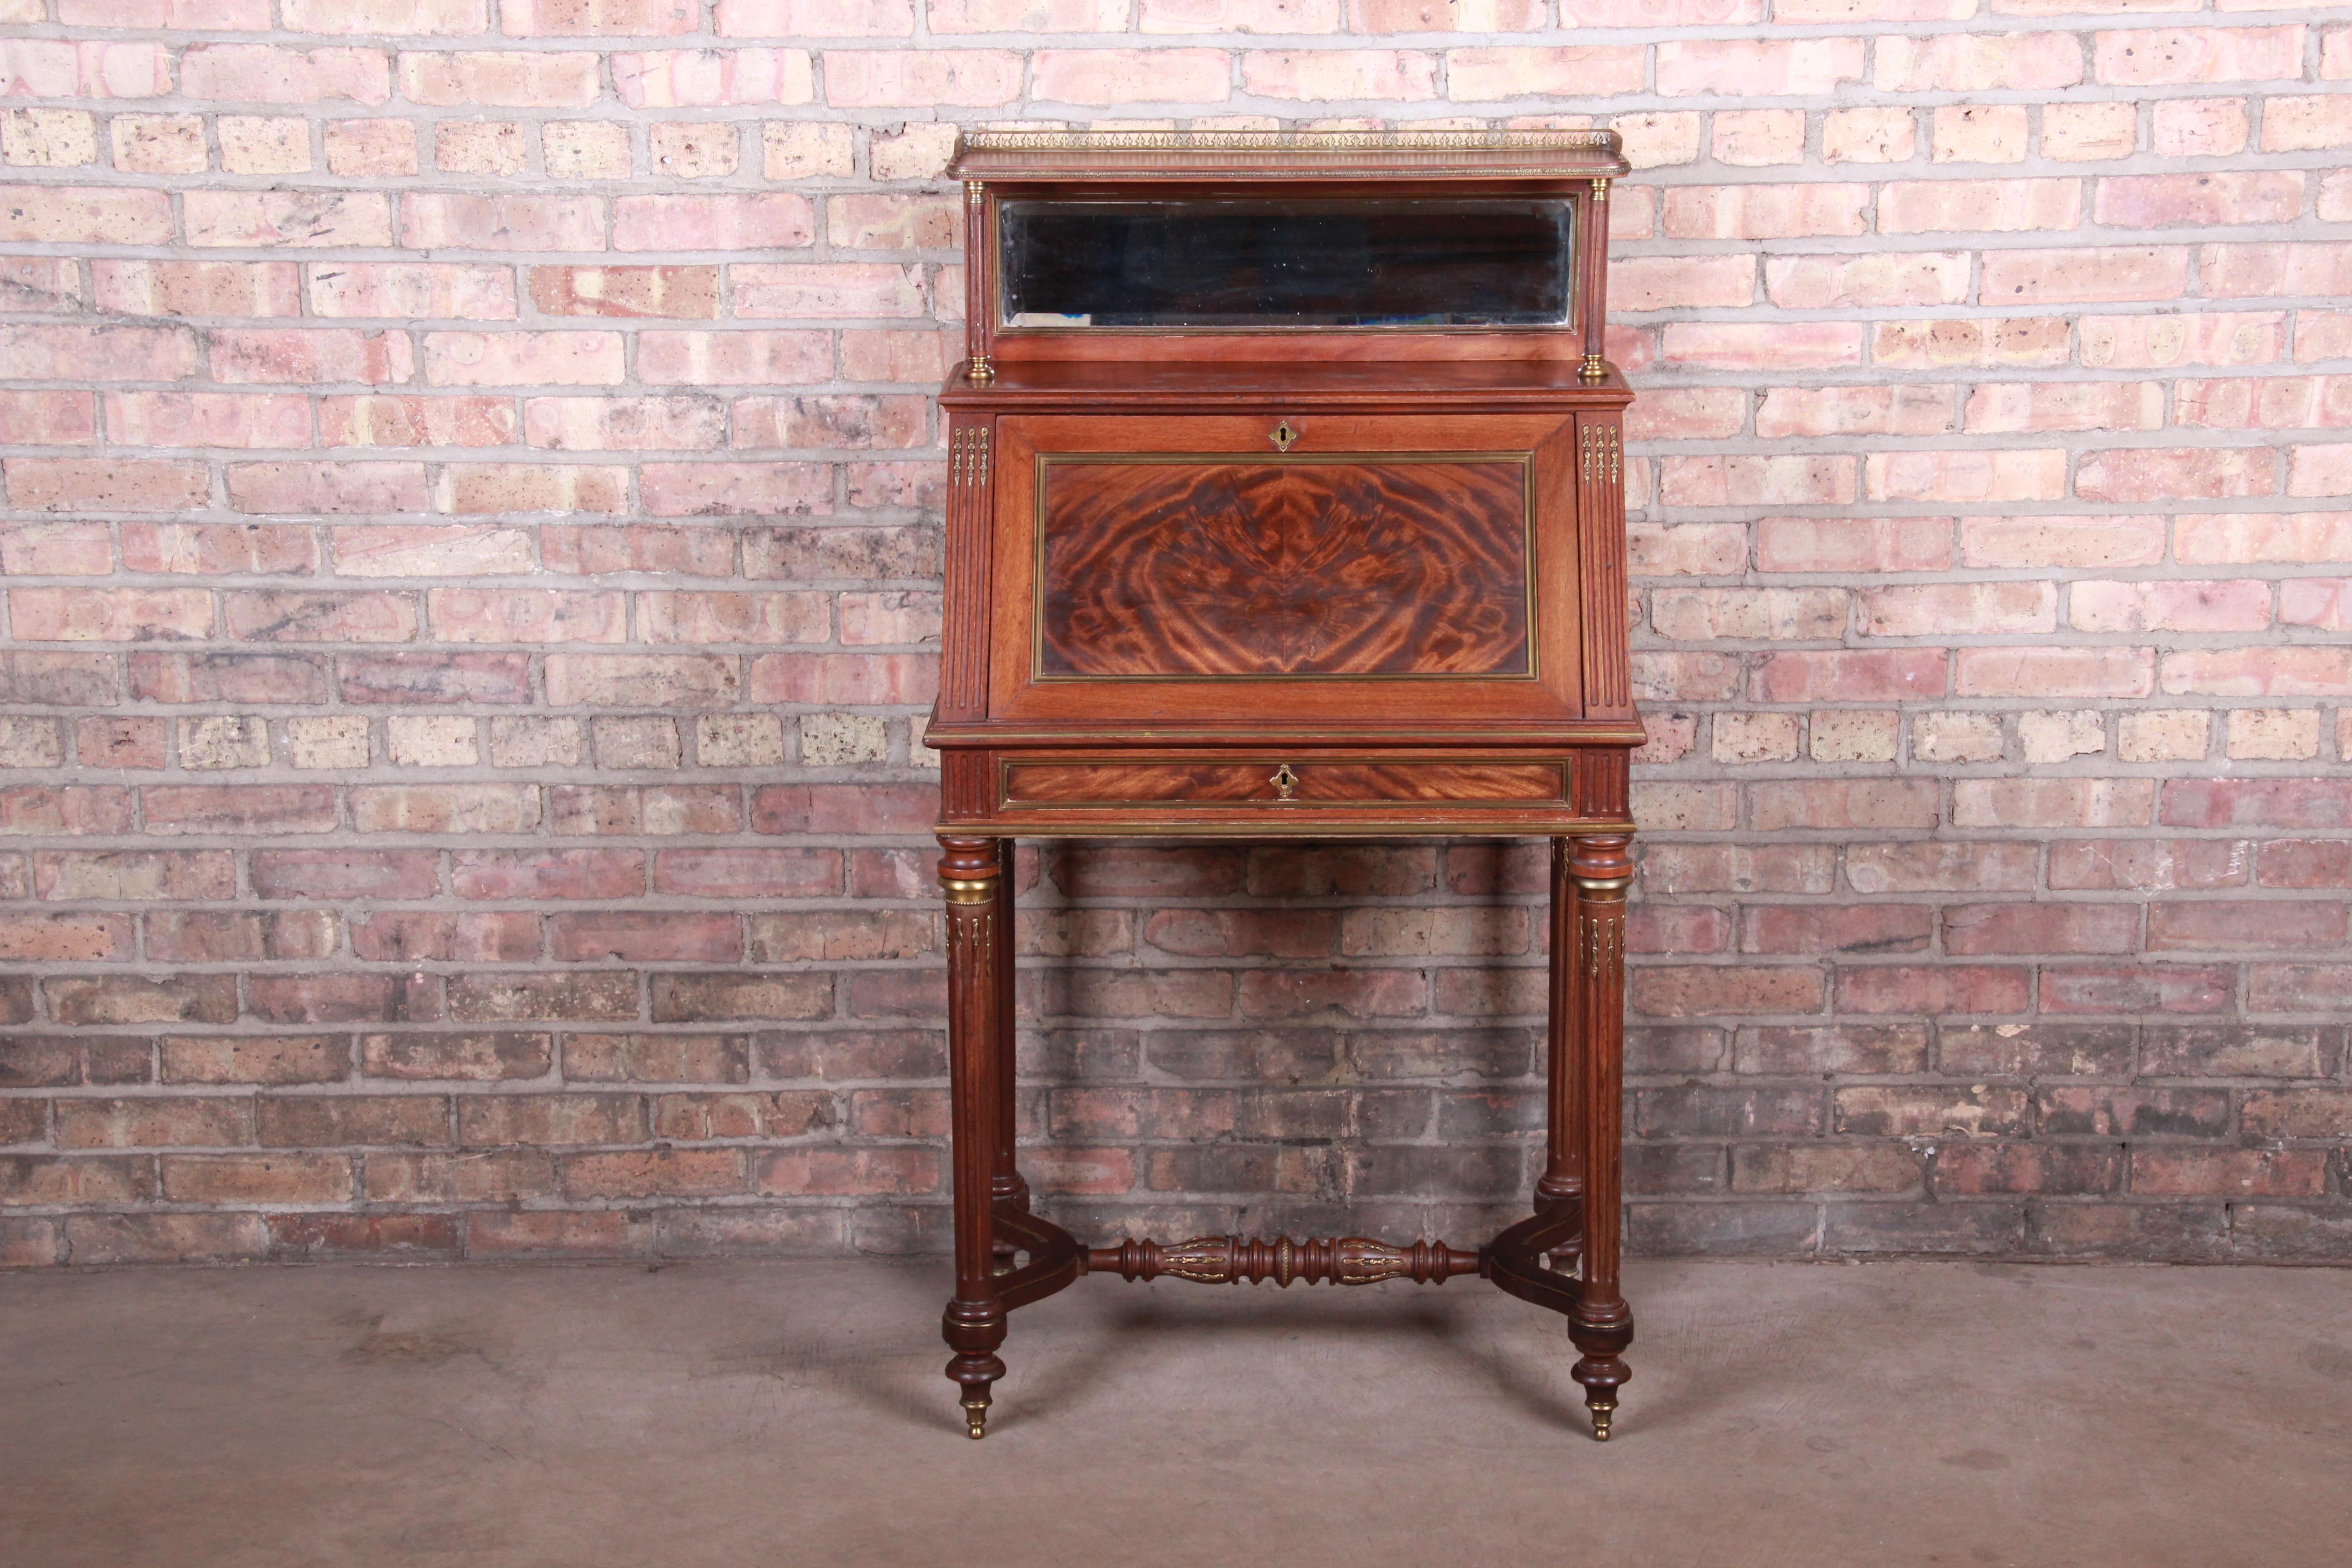 A gorgeous French slant front secretary desk

France, 19th century

Flame mahogany, with brass gallery and accents, beveled mirror, and leather writing surface.

Measures: 26.88